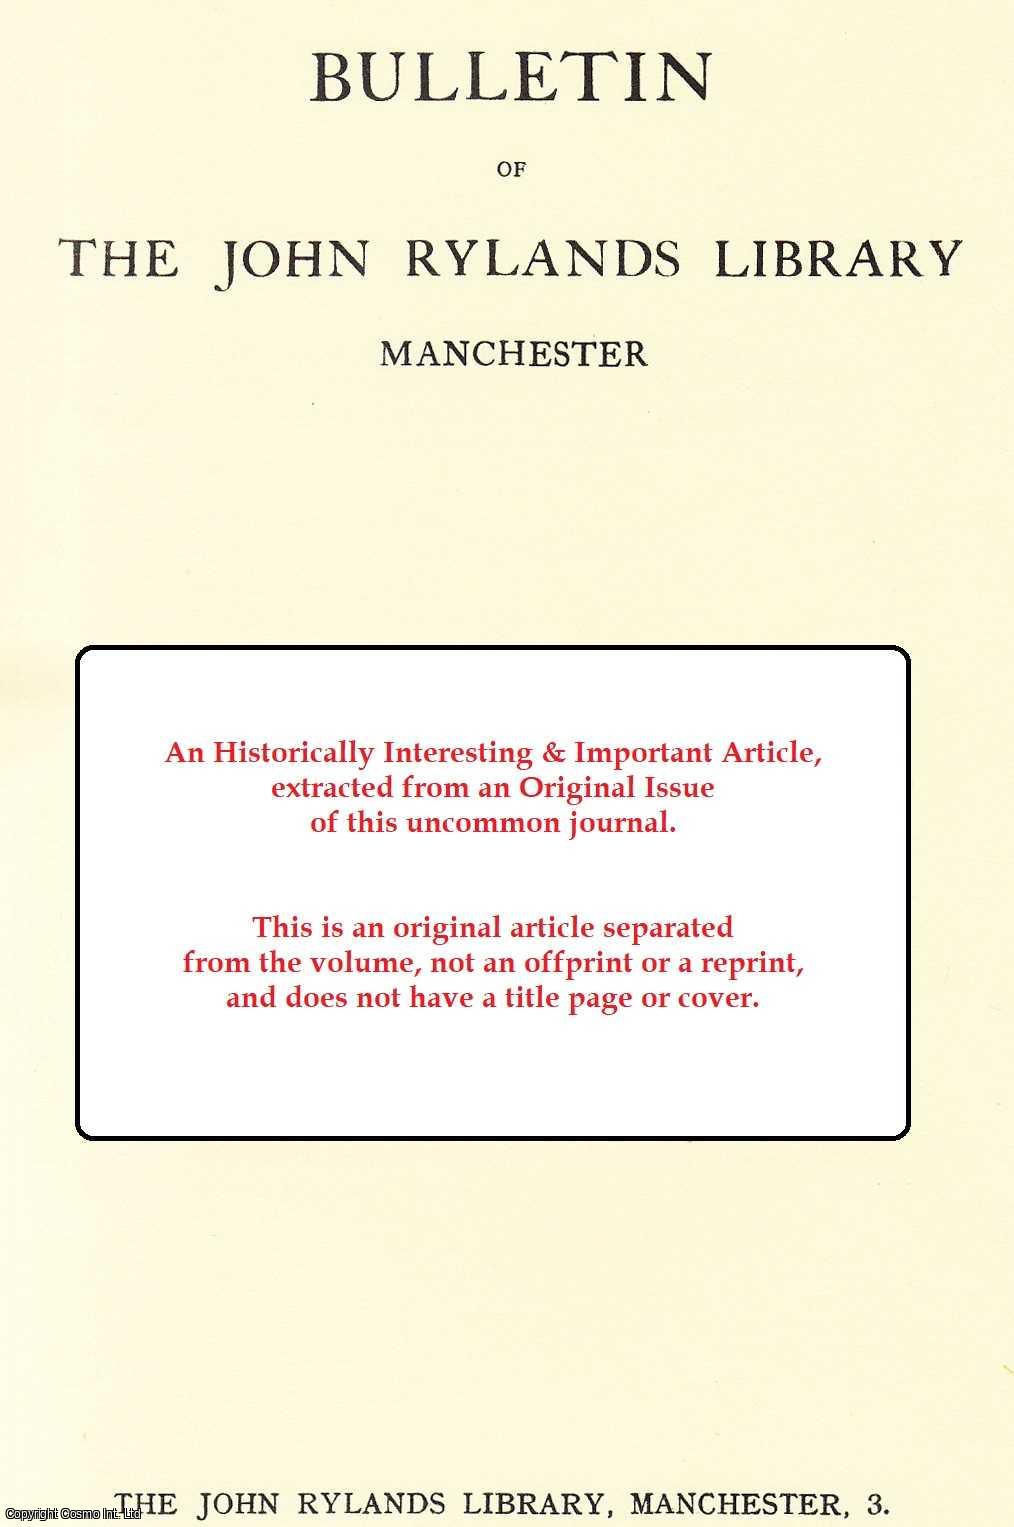 Eric John - Beowulf and the Margins of Literacy. An original article from the Bulletin of the John Rylands Library Manchester, 1974.